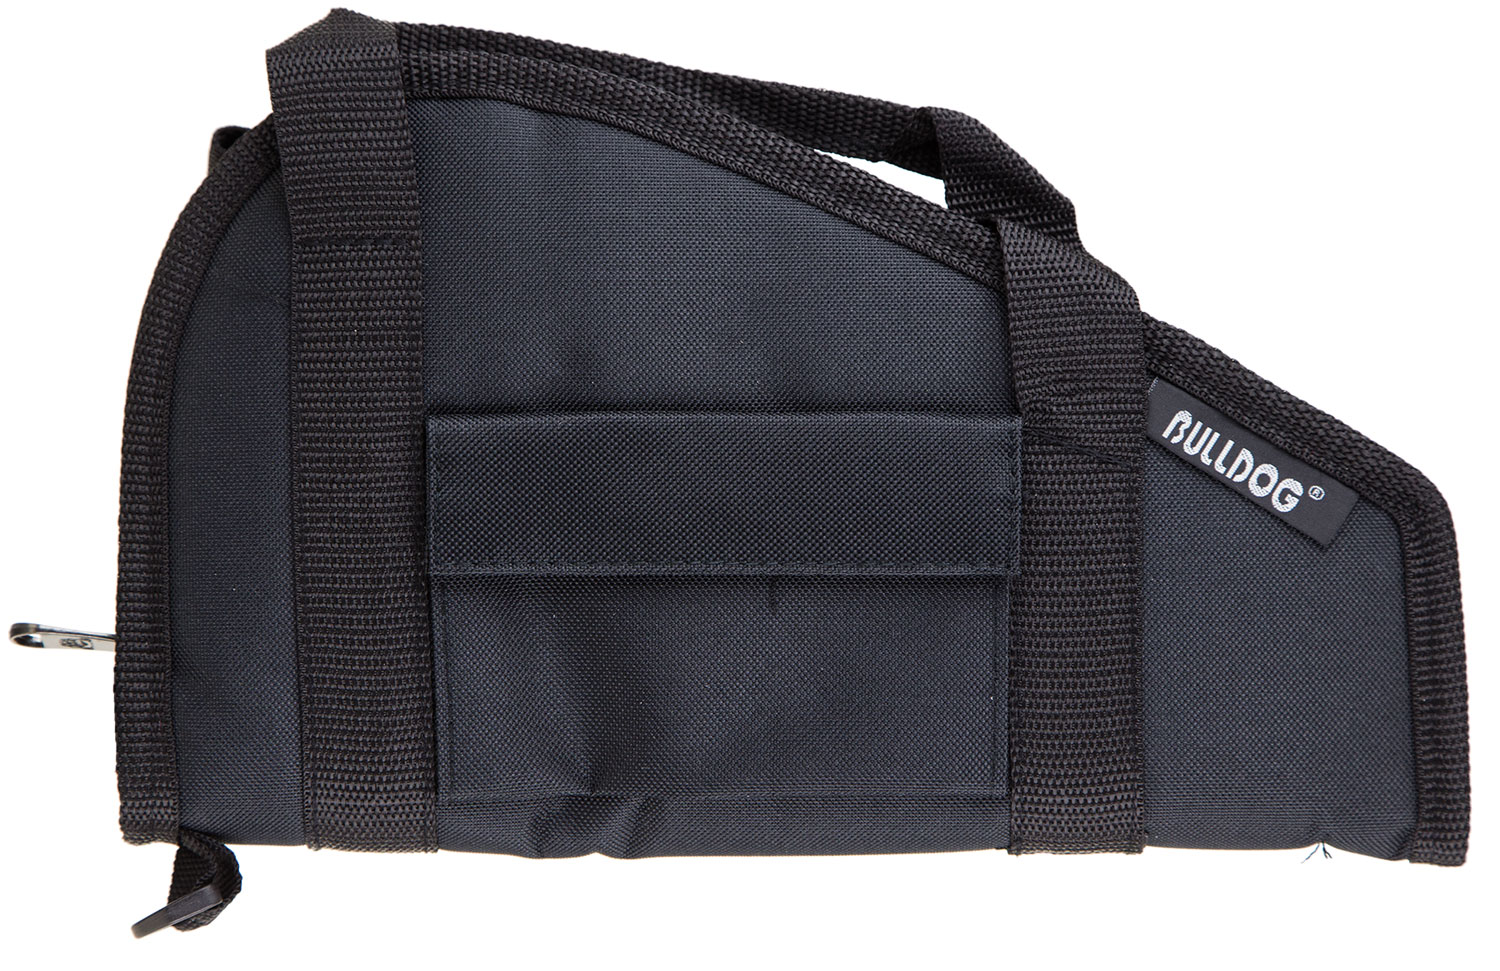 Bulldog BD602 Pistol Rug  Large Size made of Water-Resistant Nylon with Black Finish, Velcro Accessory Pocket, Thick 1.75